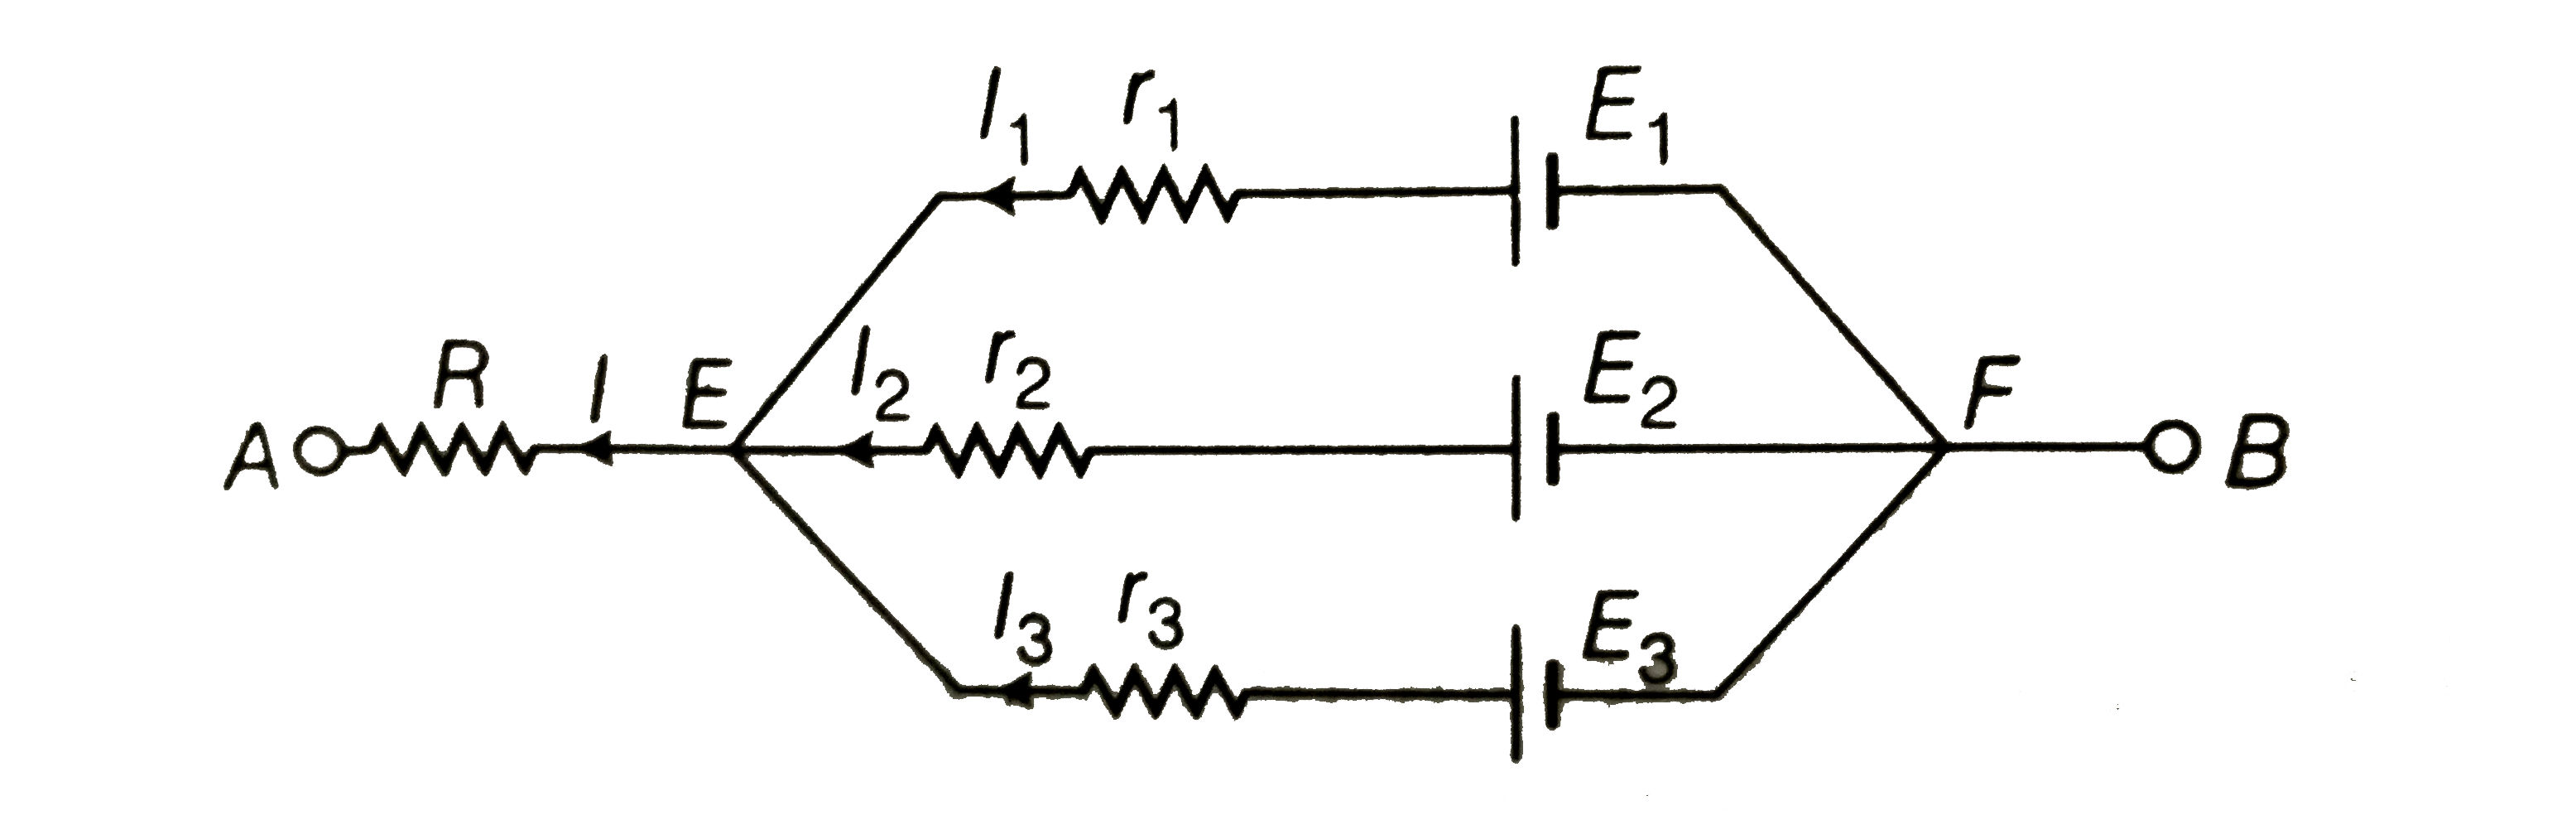 In the circuit as shown in figure,    E(1)=2V , E(2)=2V, E(3)=1V, and R=r(1)=r(2)=r(3)Omega.   The potential difference between points A and B will be